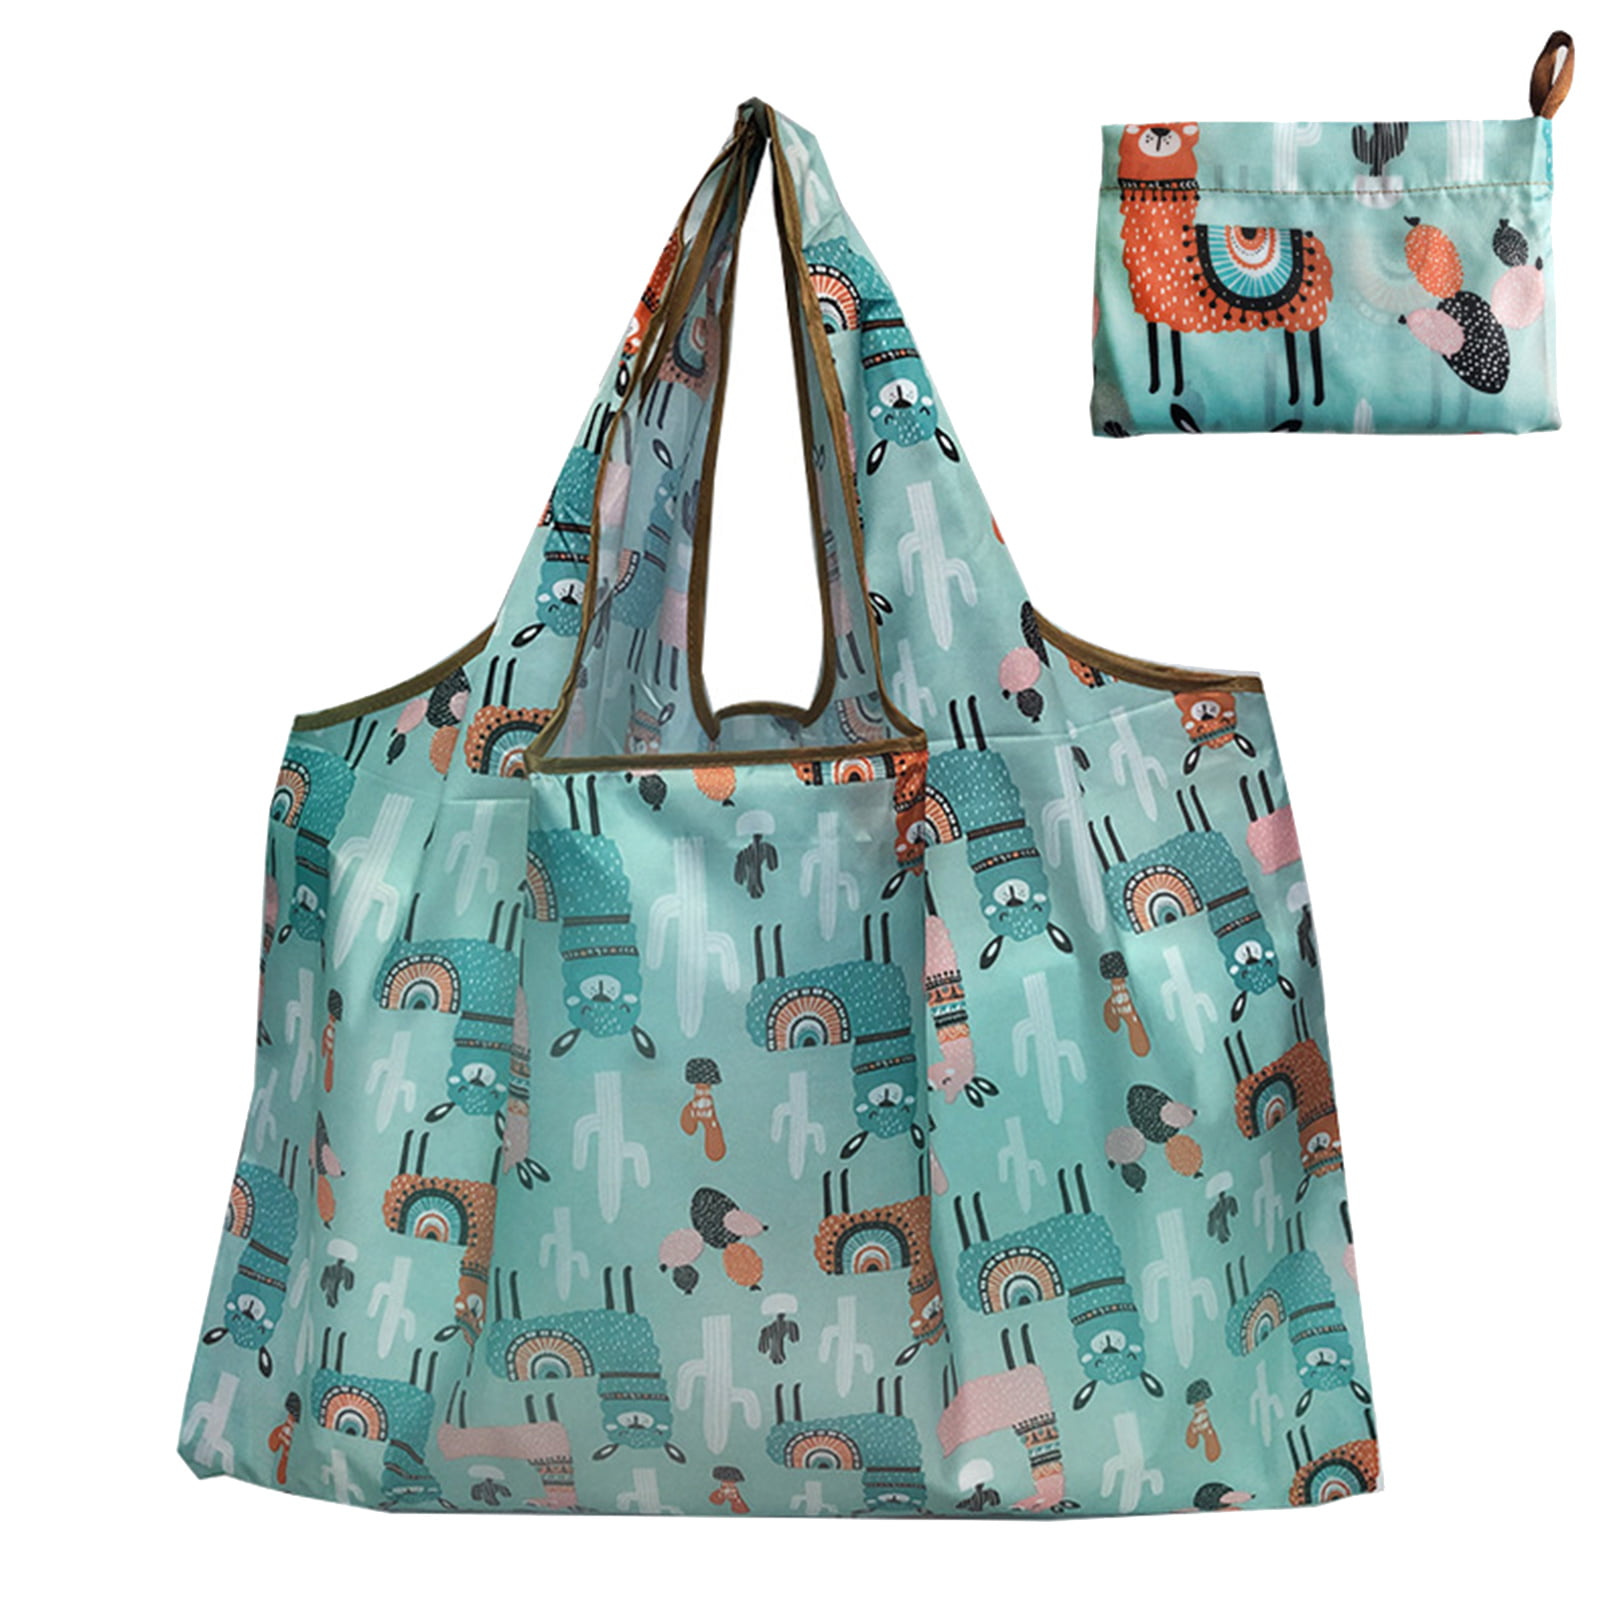 Details about   Foldable Reusable Shopping Bag Grocery Pouch Recycle Organization Bag For Women 